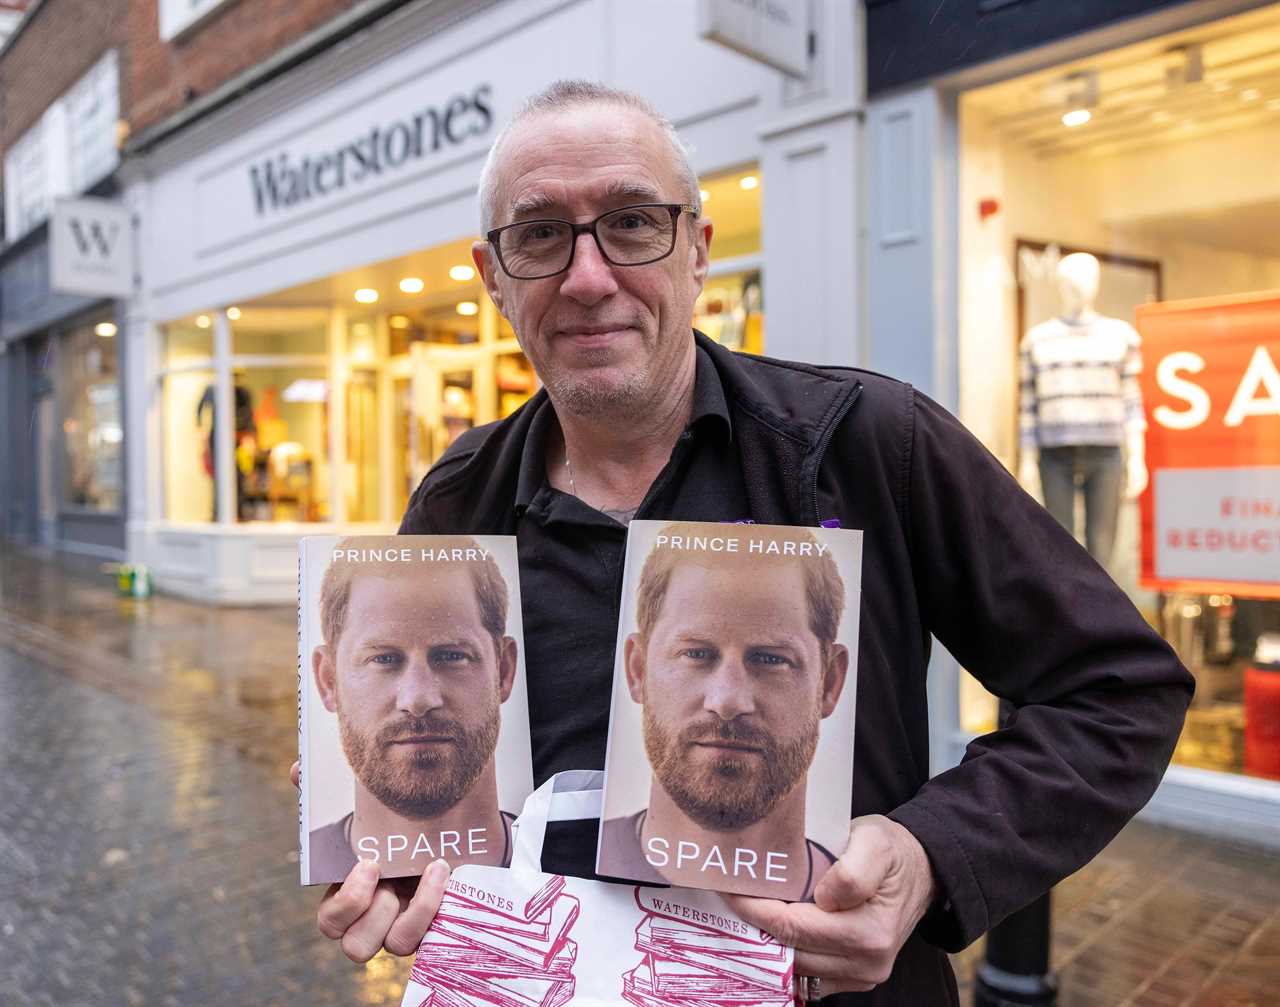 Joker bookshop boss puts Prince Harry’s memoir Spare next to Bella Mackie’s How to Kill Your Family in window